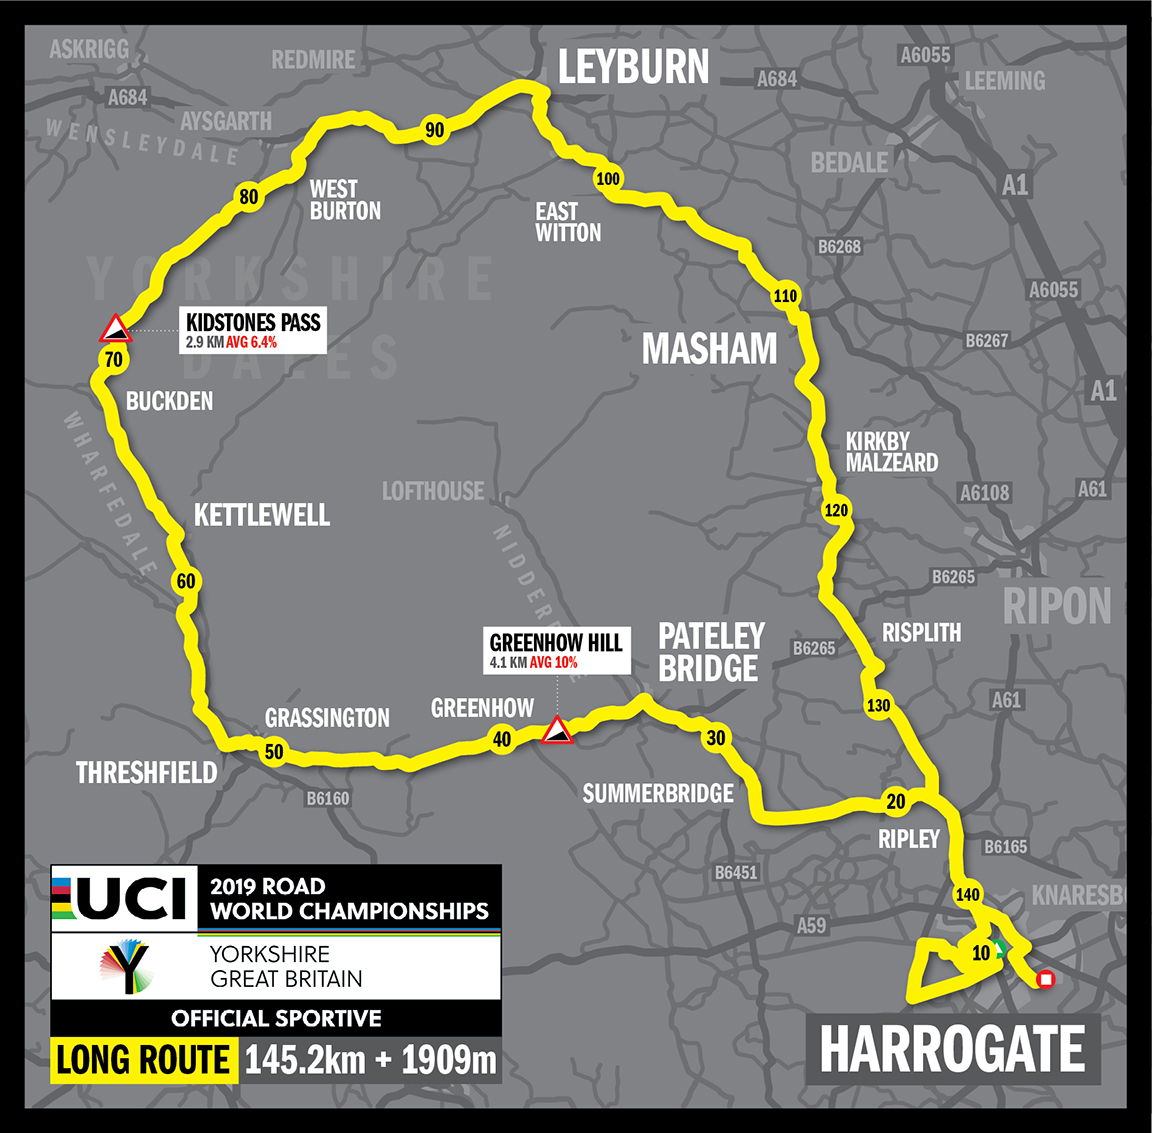 ticket-ballot-is-open-for-uci-road-world-championships-sportive-road-cc